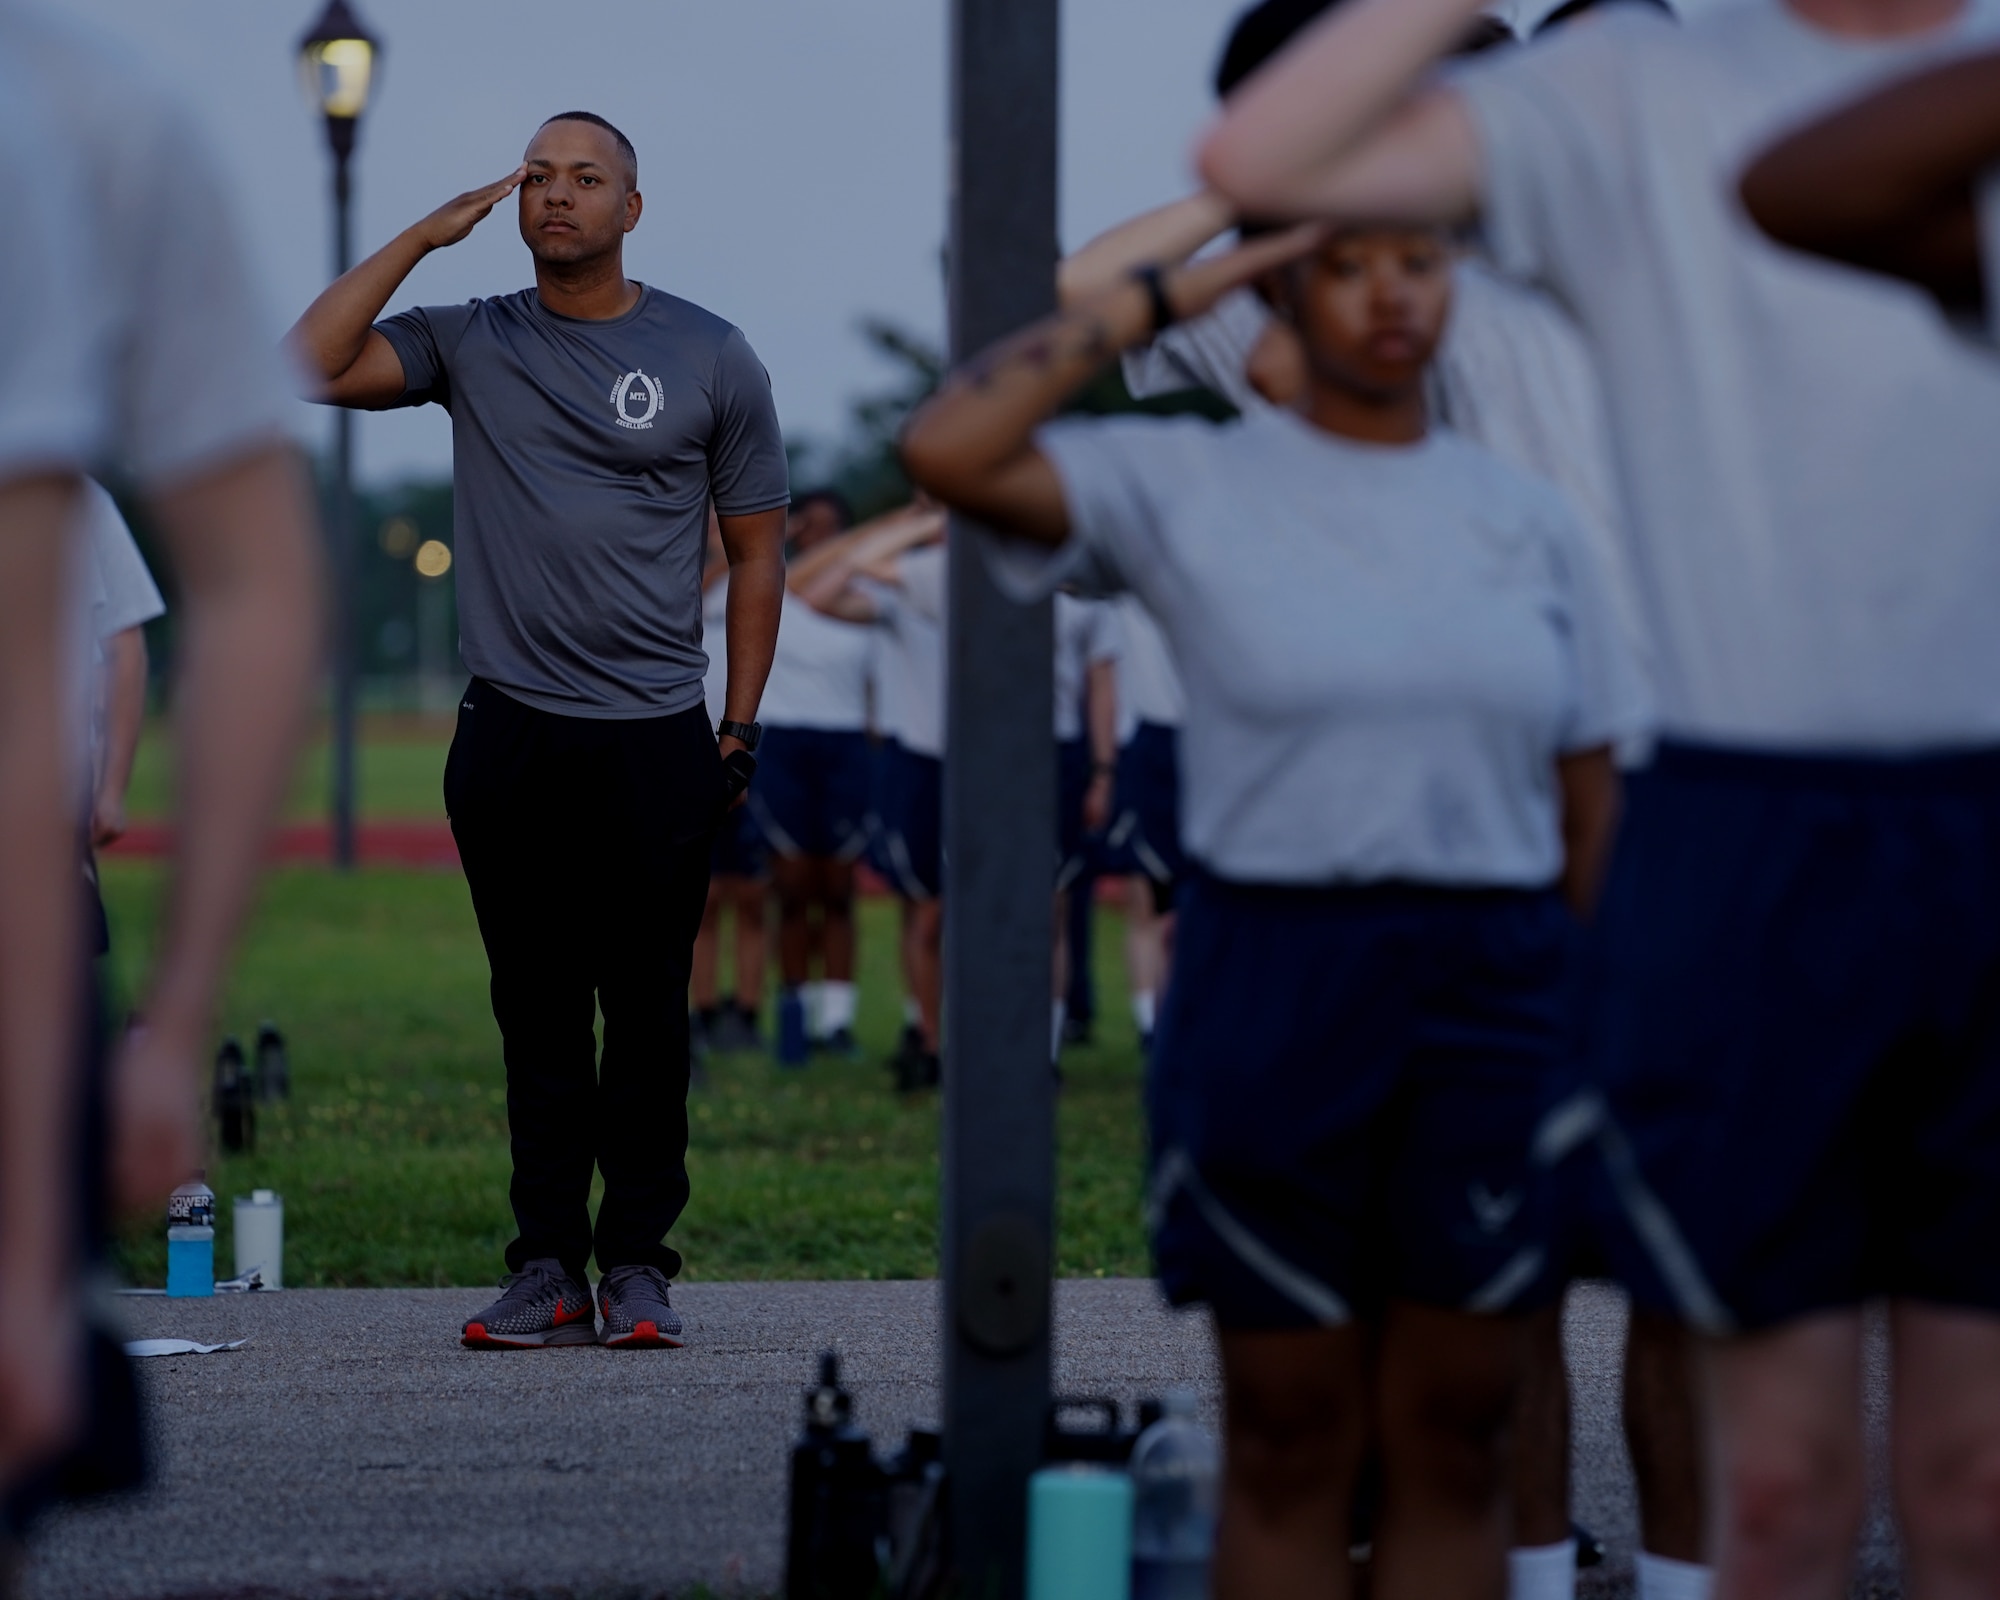 U.S. Air Force Tech. Sgt. Alvin Morris, 336th Training Squadron master military training leader, salutes before physical training at the Triangle track on Keesler Air Force Base, Mississippi, June 29, 2021. “An MTL consistently enforces standards of conduct and expectations to develop Airmen to be prepared to enter the operational Air Force,” said Morris. “We are the professional example for Airmen to emulate and first look at what a healthy leadership team looks like. It is our responsibility to inspire Airmen to take pride in serving and exhibit excellence in all we do.” (U.S. Air Force photo by Senior Airman Spencer Tobler)